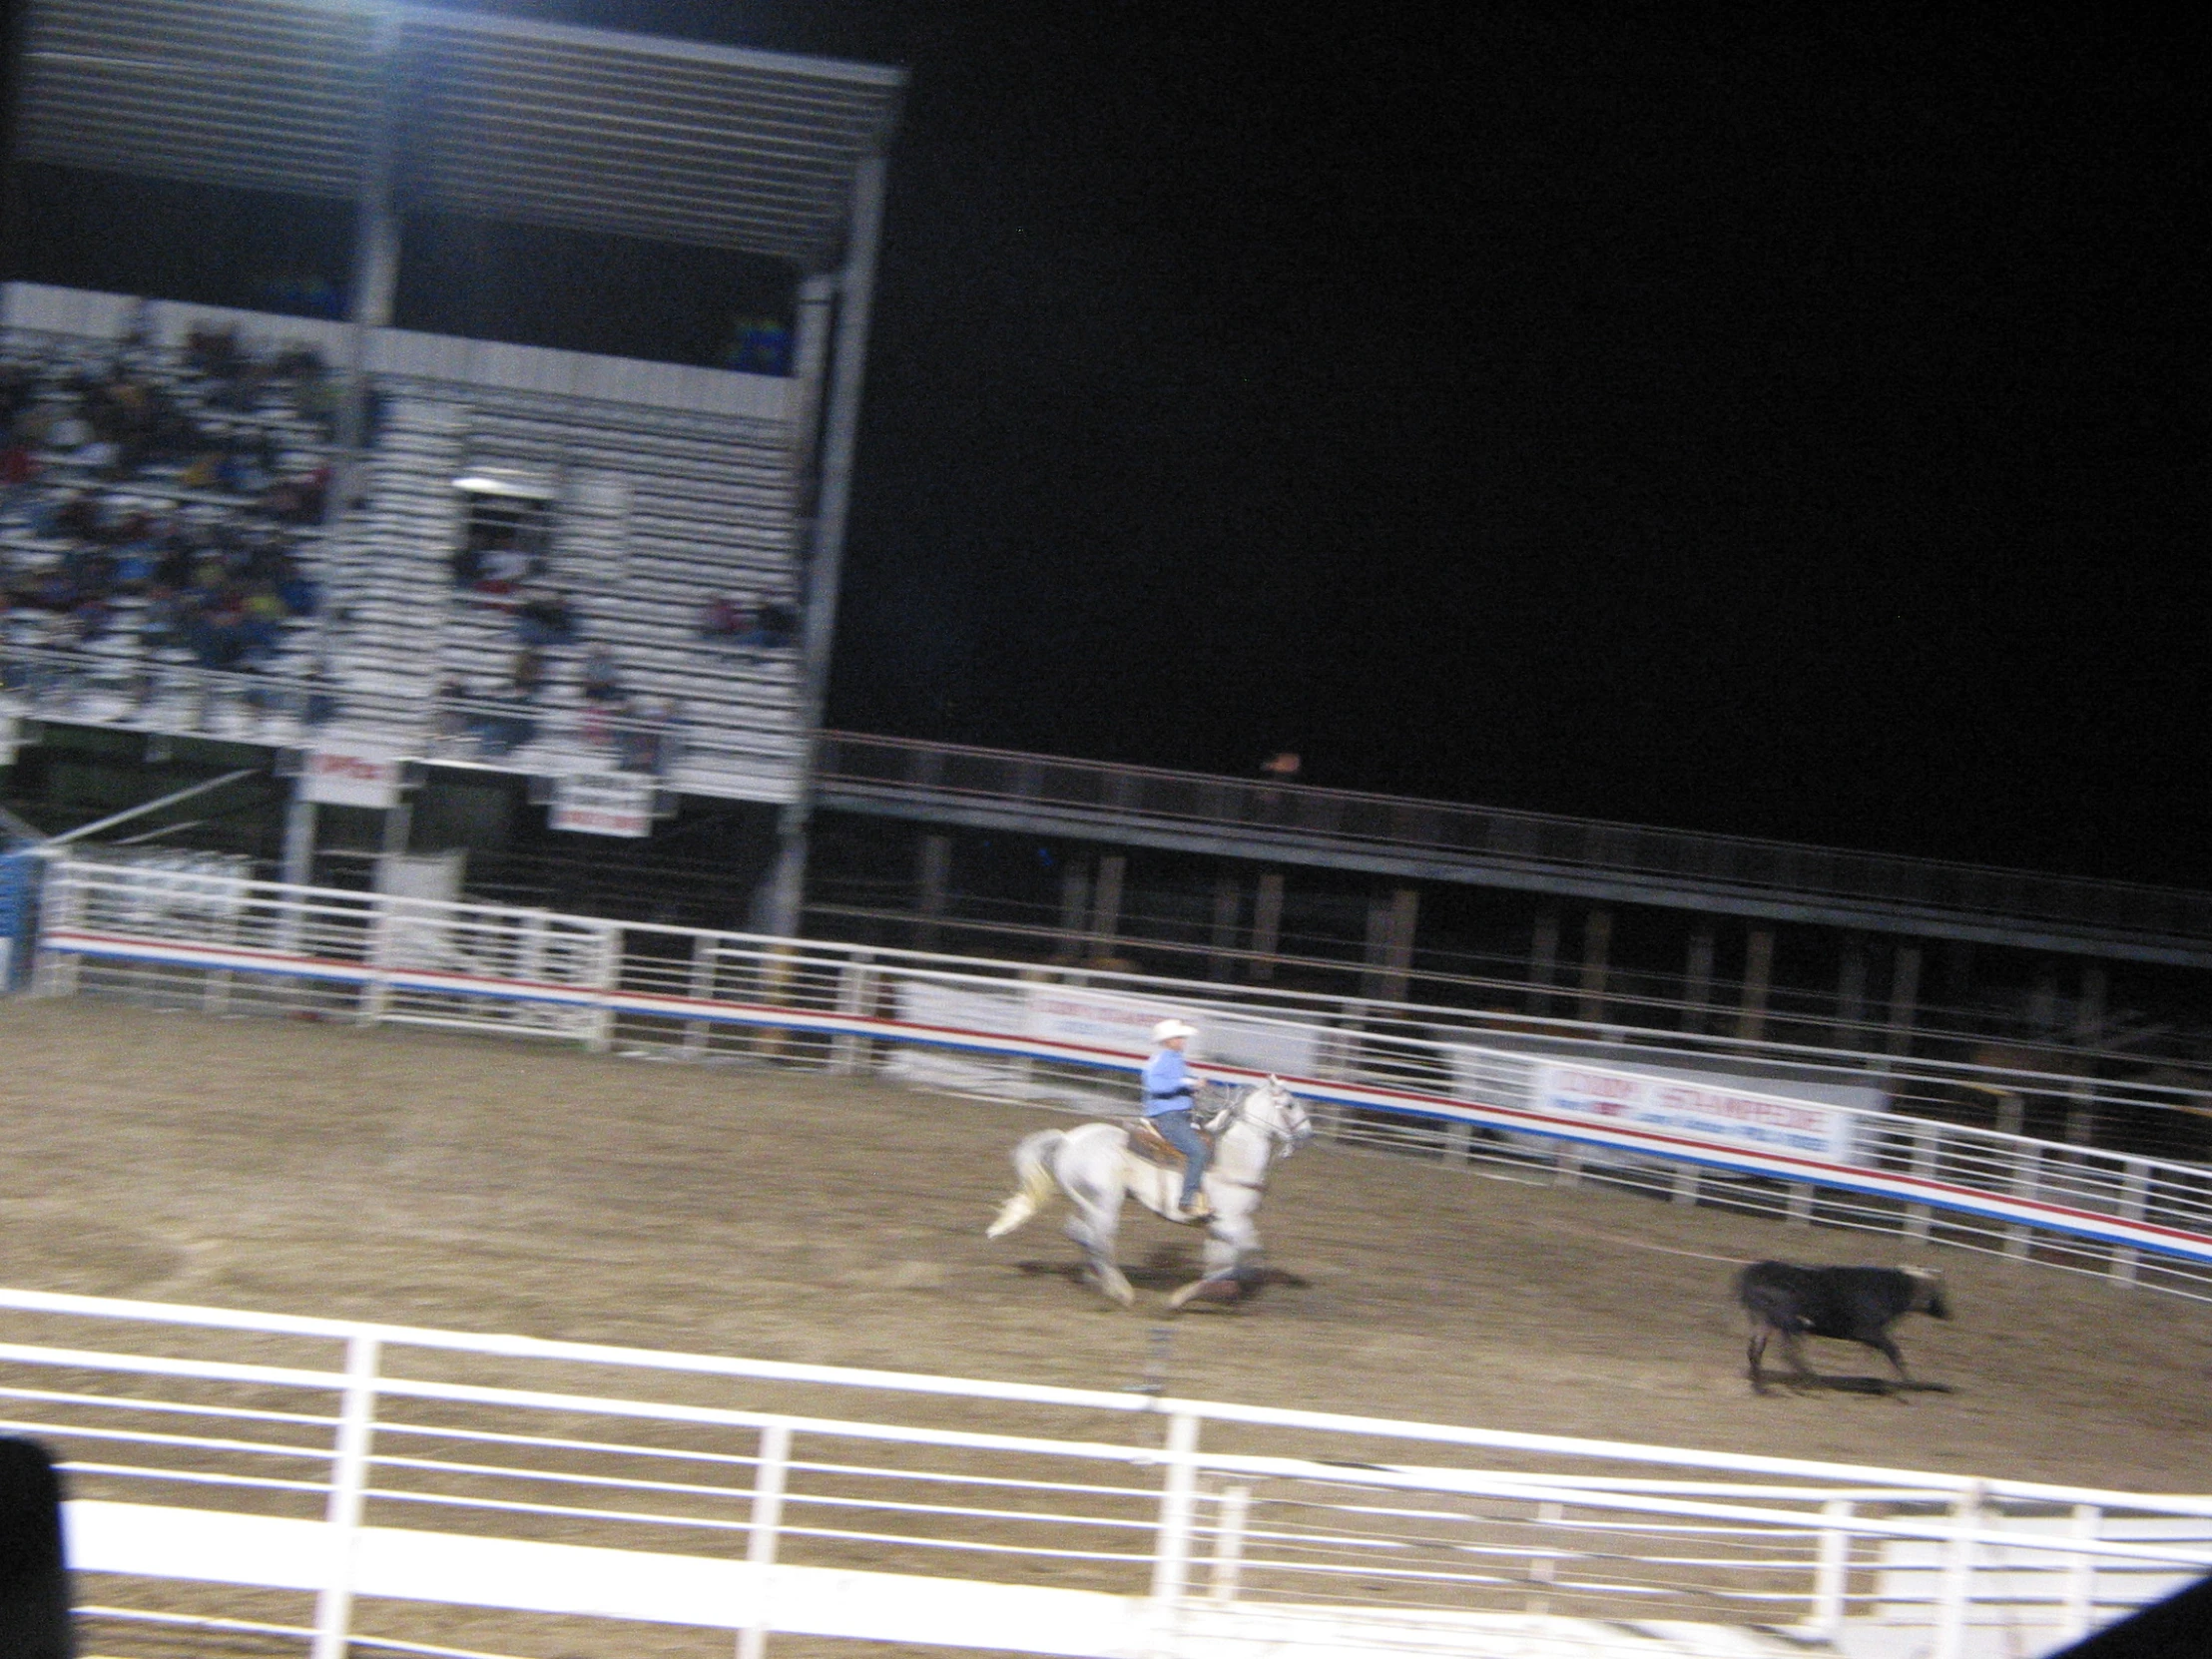 a man on a horse rides around an arena